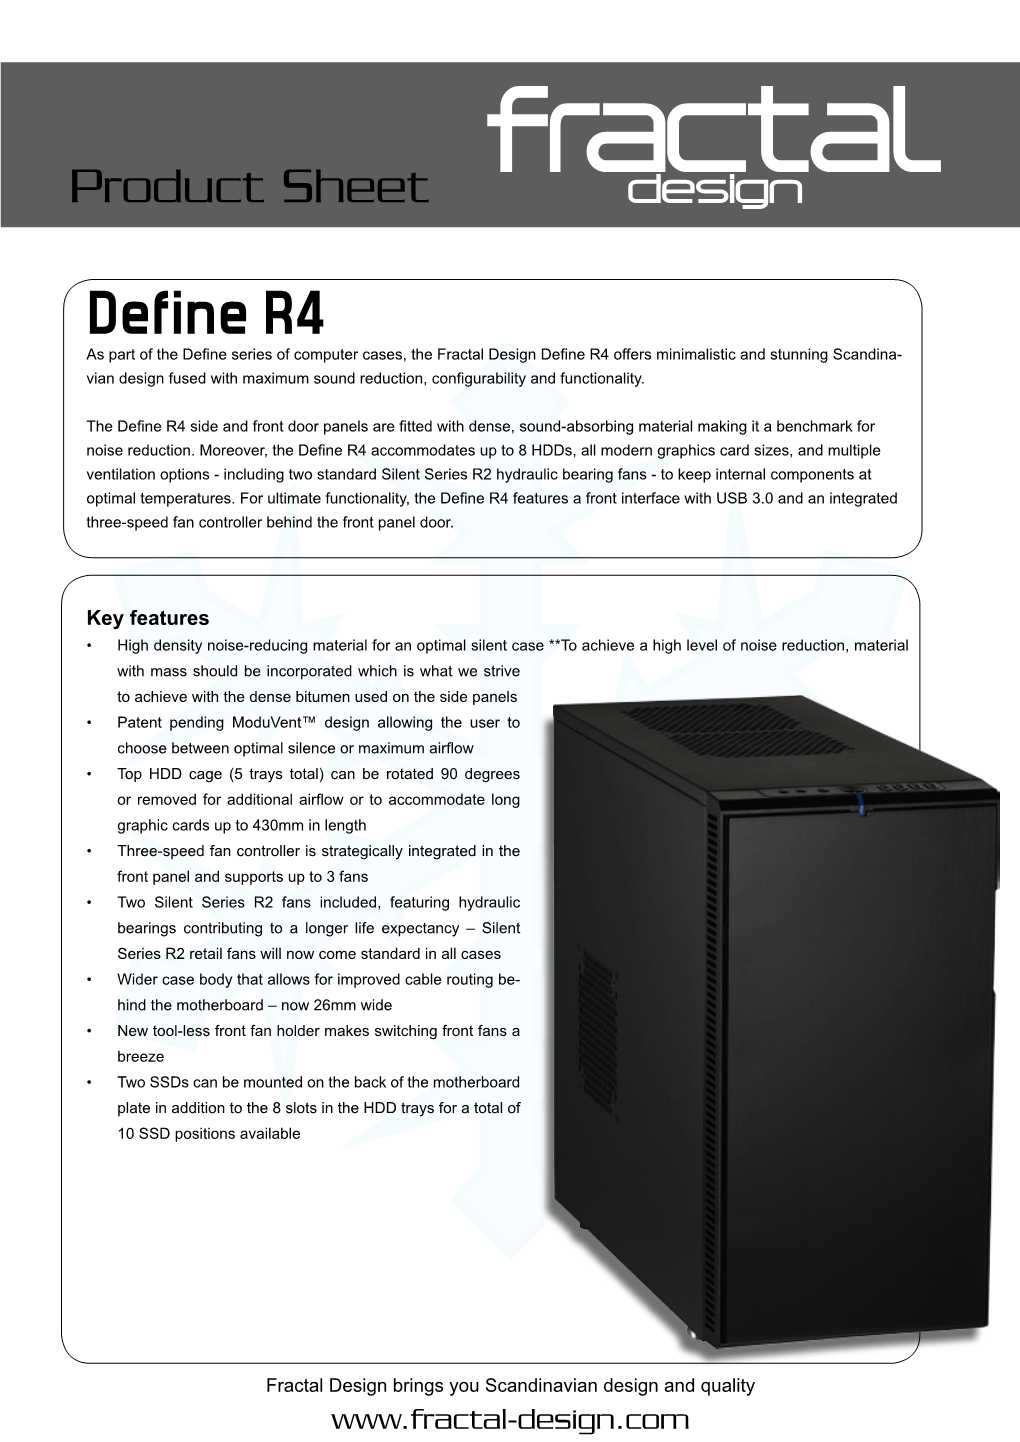 Fractal Design Define R4 Offers Minimalistic and Stunning Scandina- Vian Design Fused with Maximum Sound Reduction, Configurability and Functionality